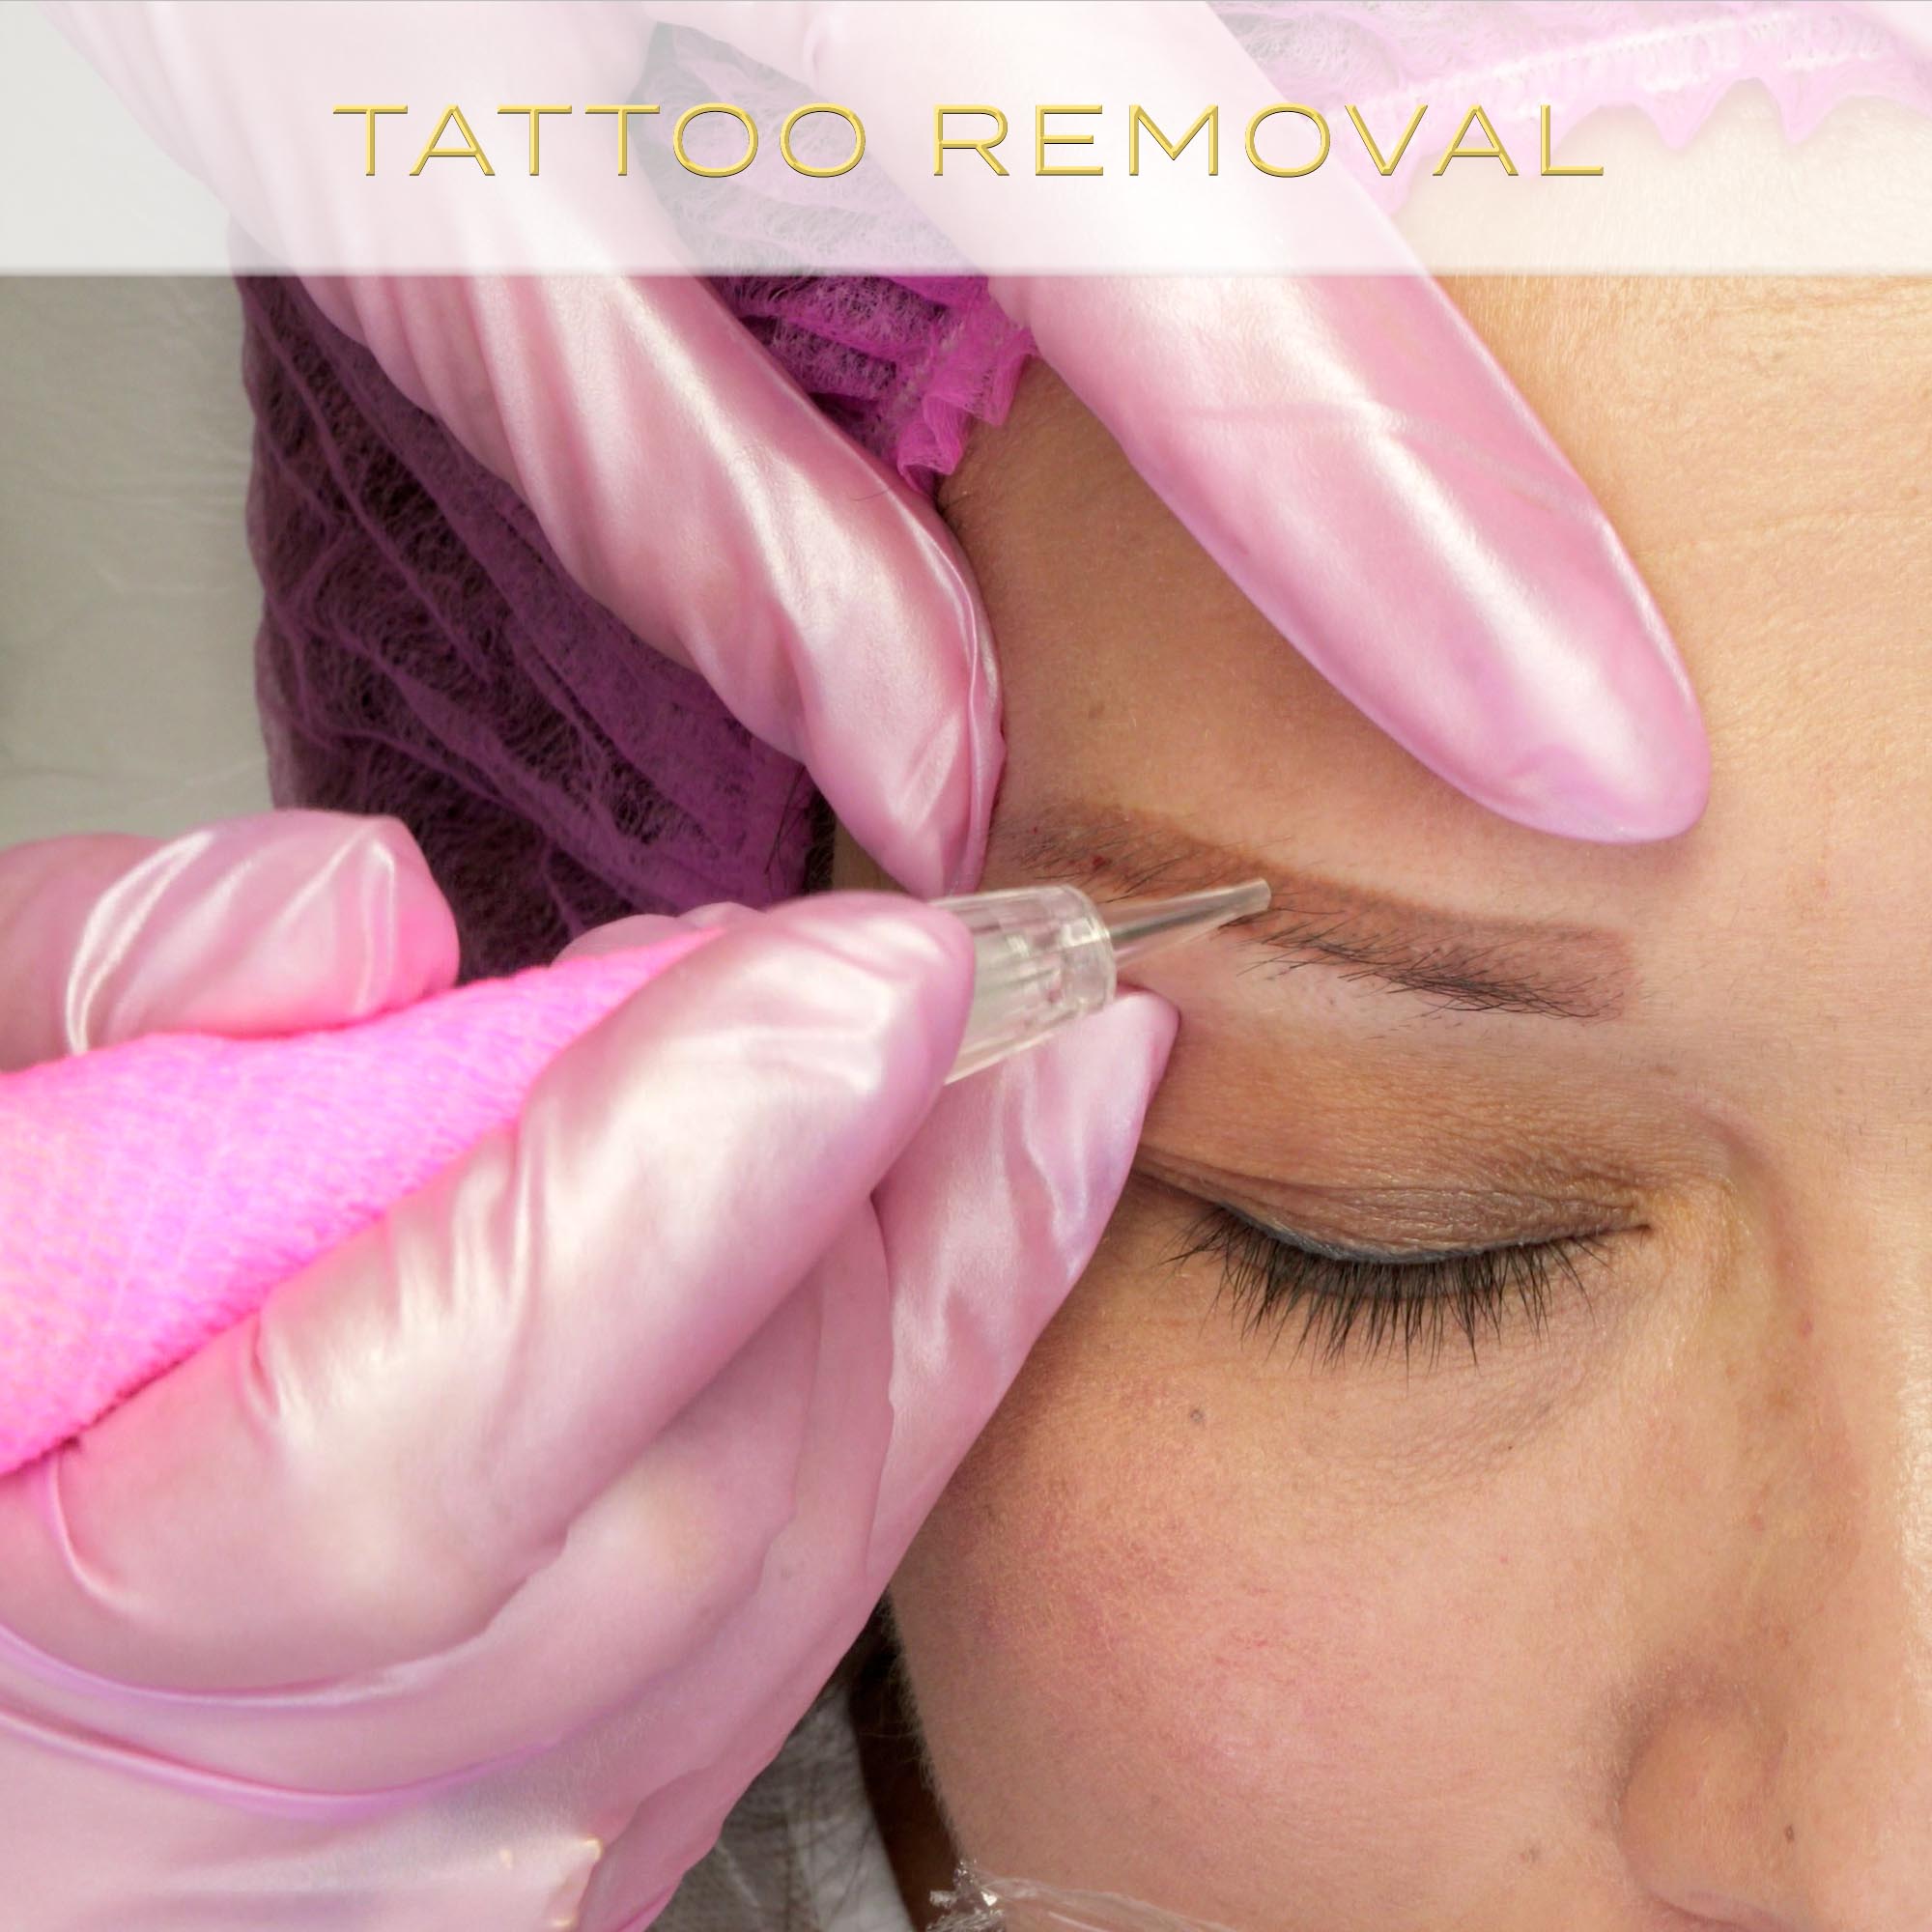 Tattoo Removal Online Course